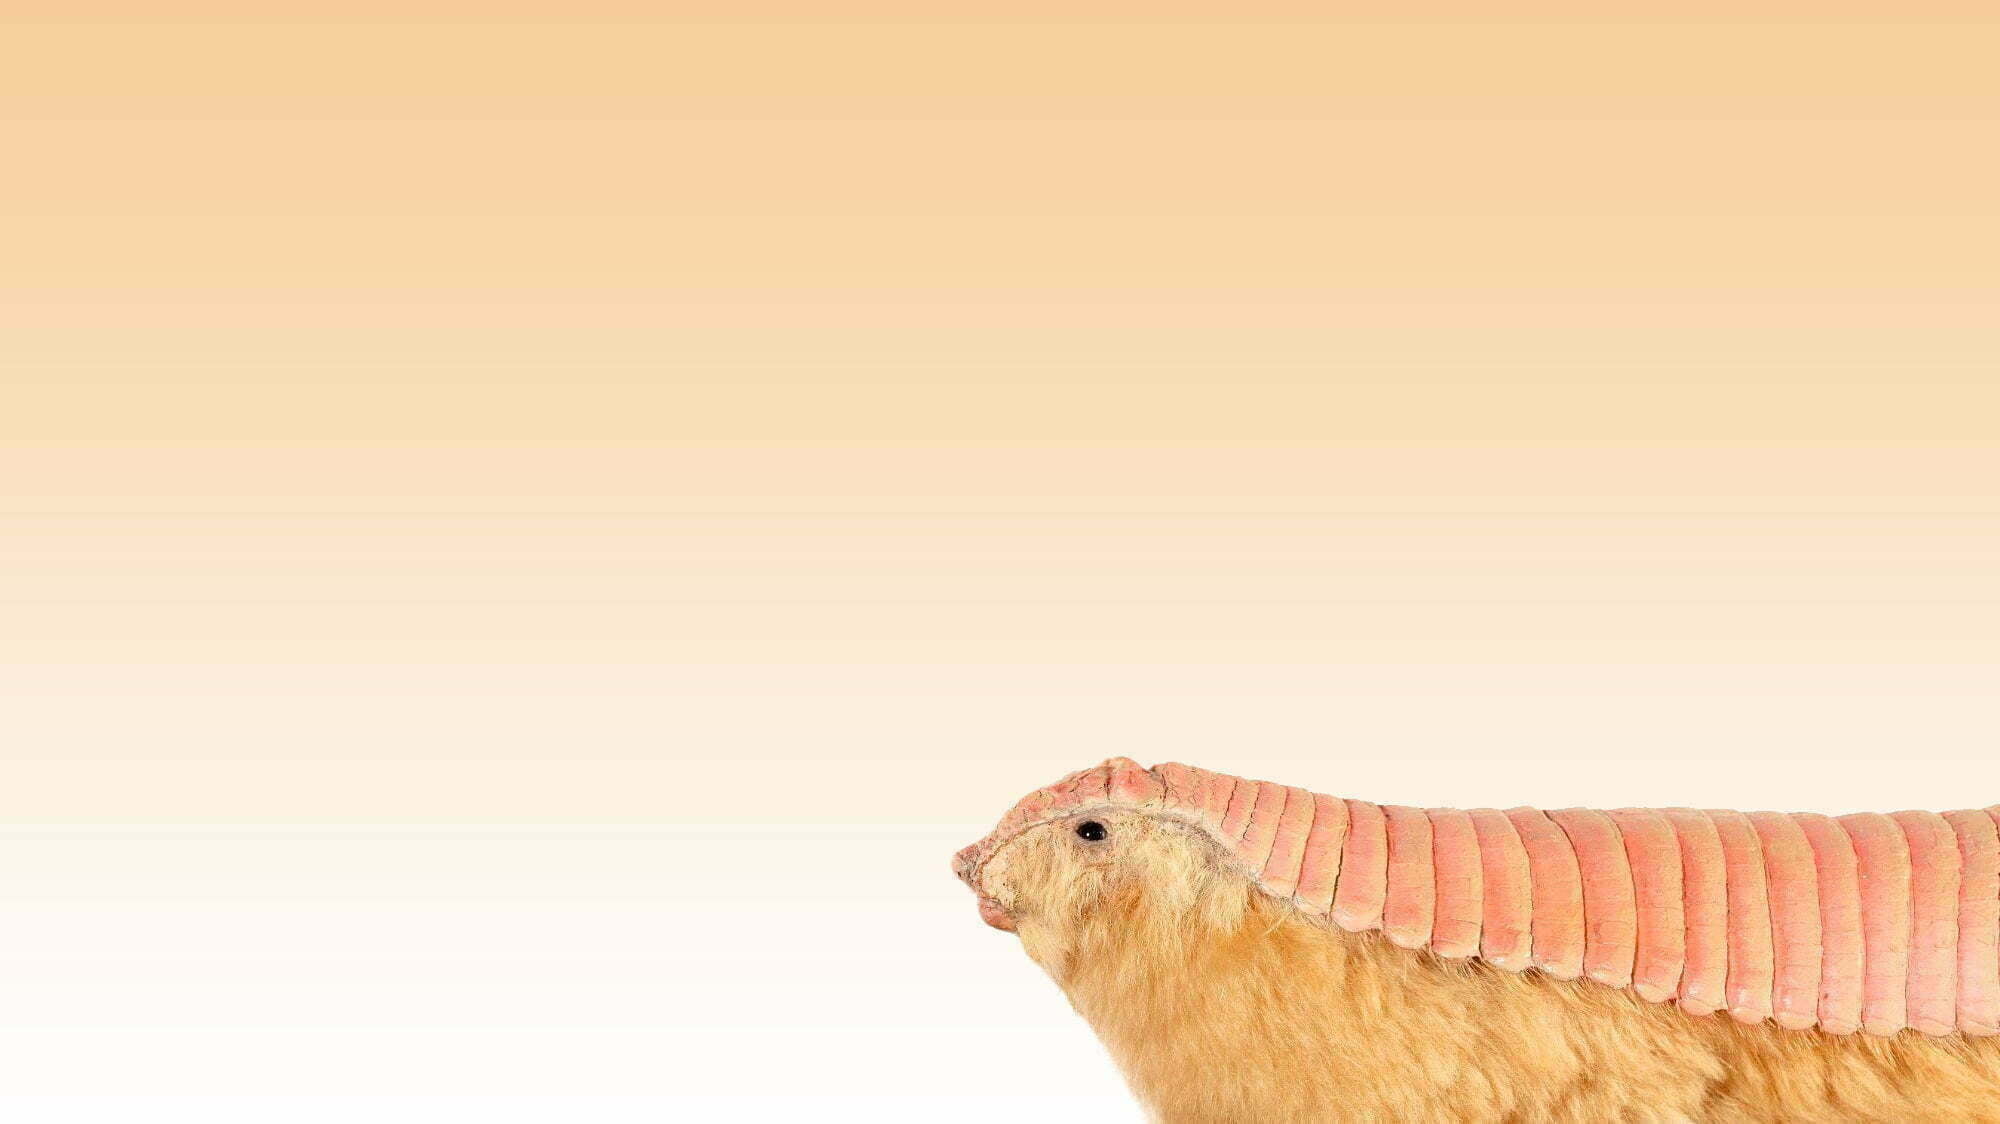 Have You Ever Seen the Adorable Pink Fairy Armadillo? No? It’s… Amazing.